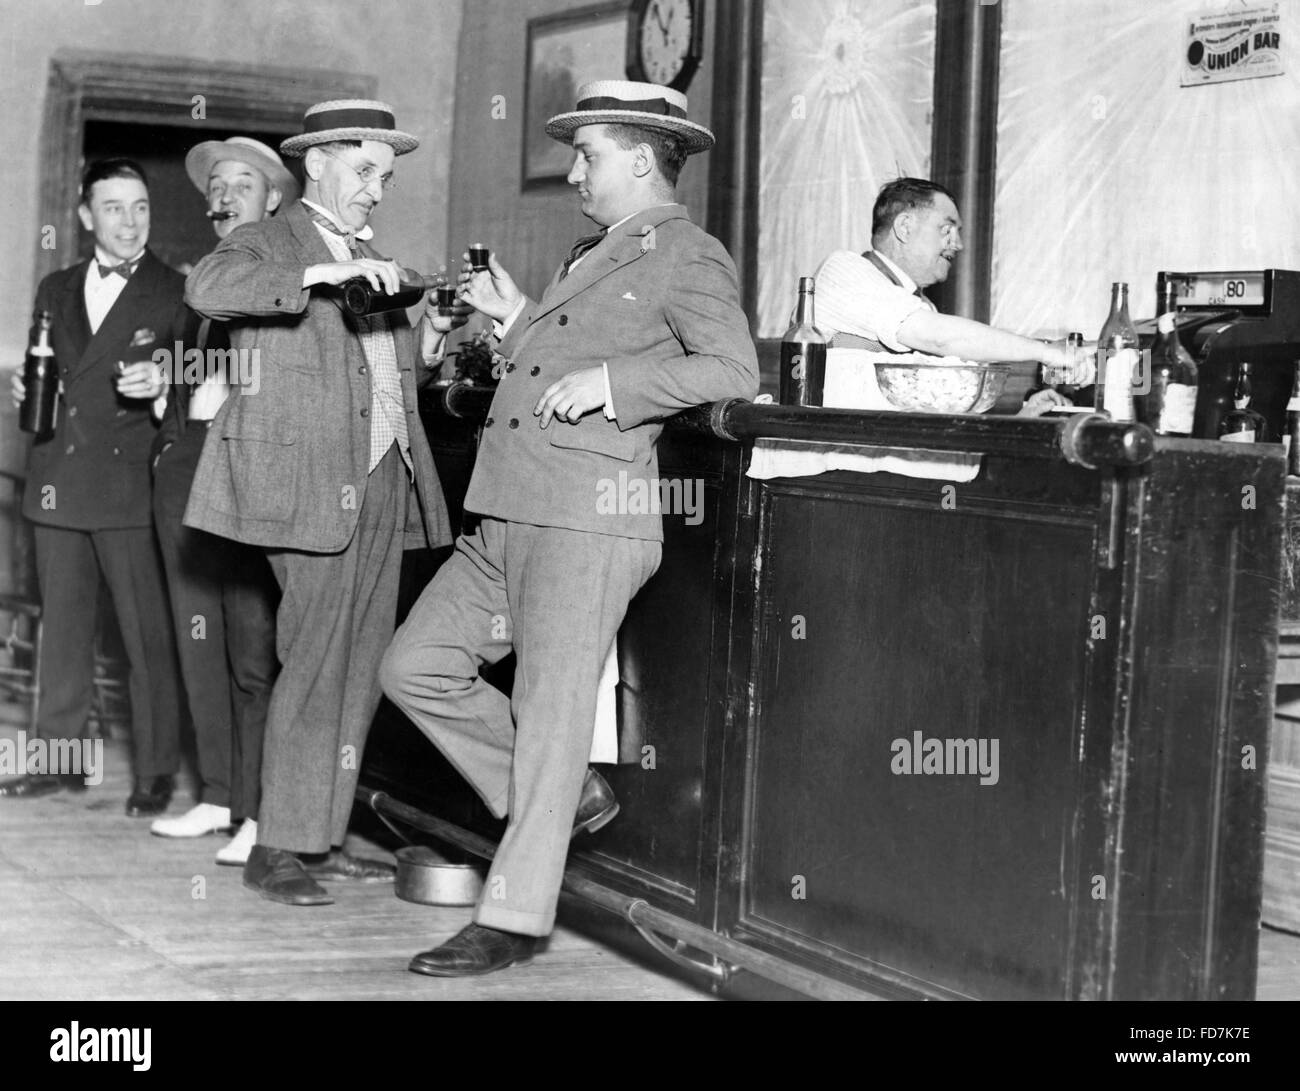 Prohibition: Drinking men in the USA Stock Photo